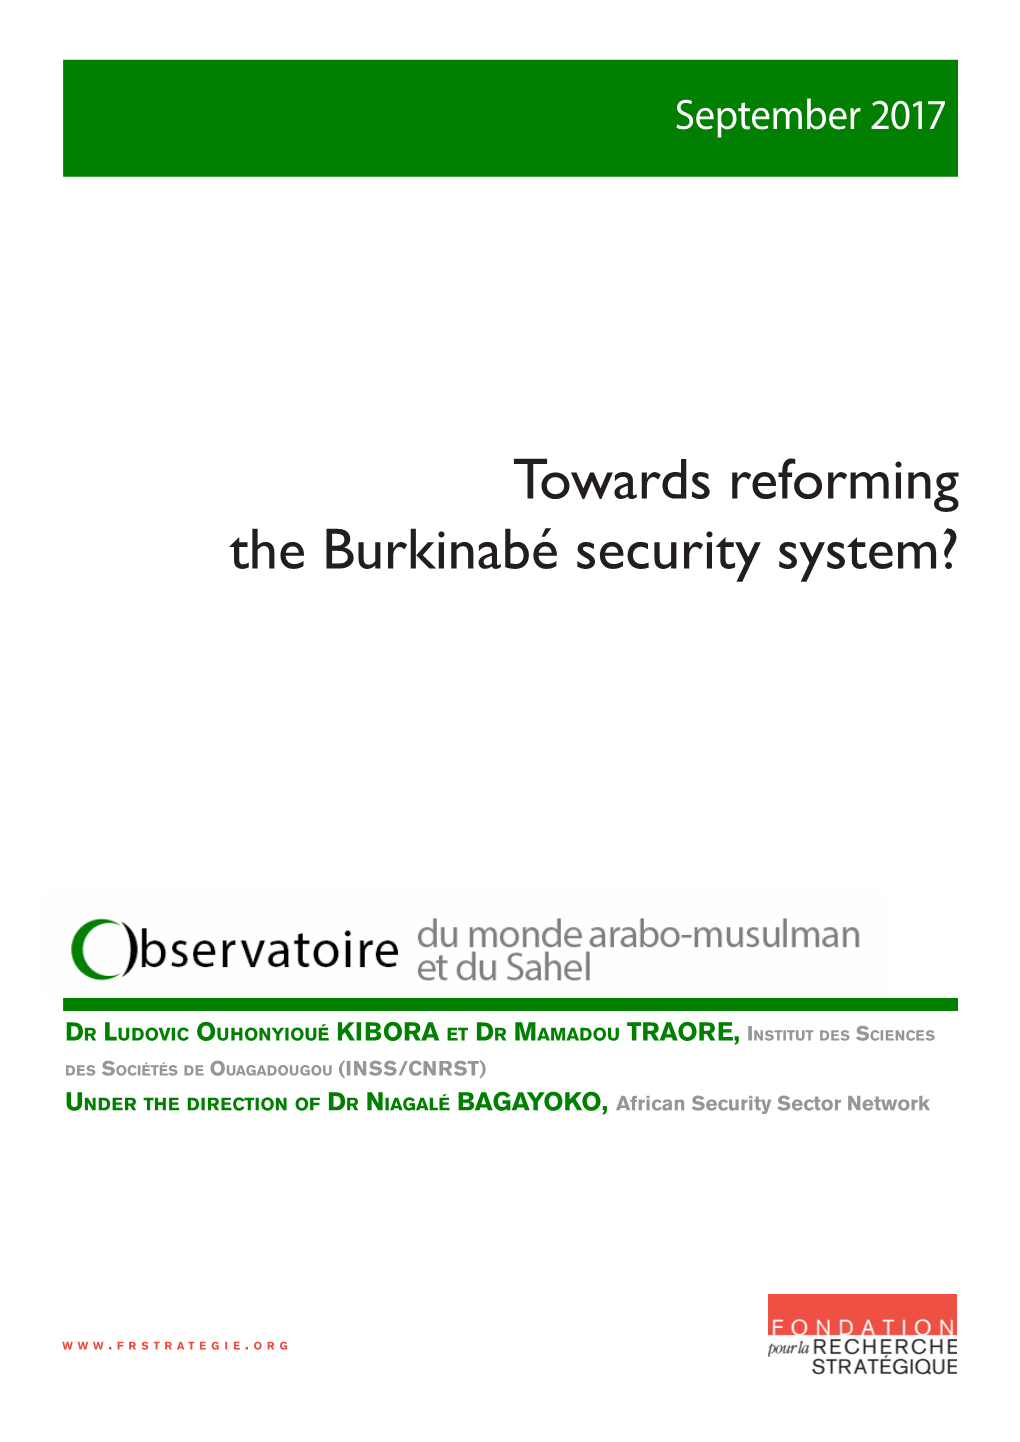 Towards Reforming the Burkinabé Security System?